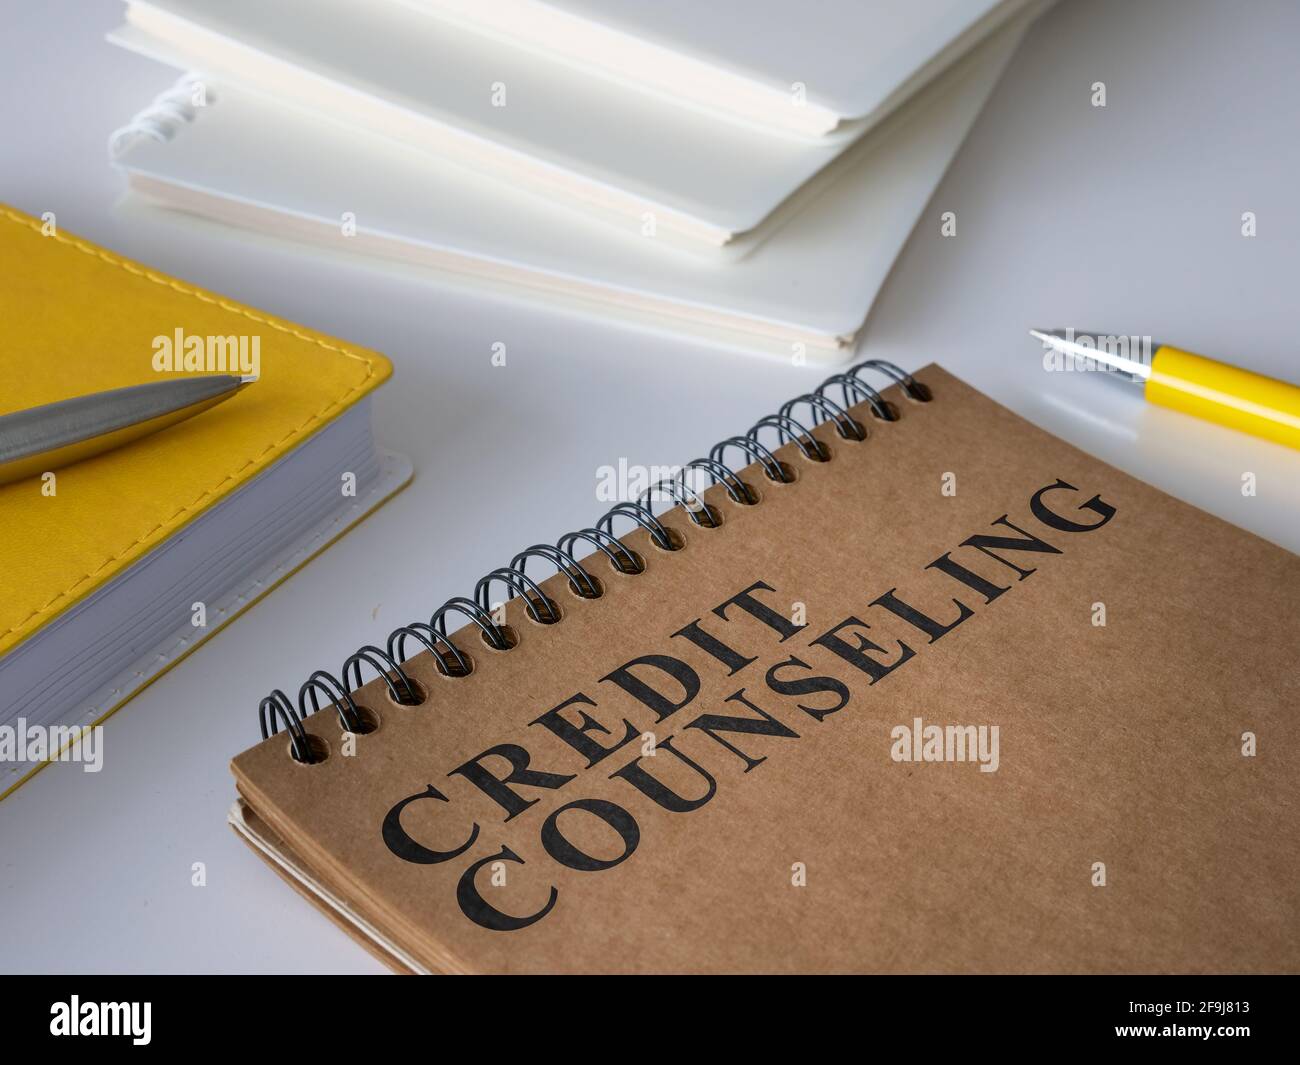 Credit counseling notepad on the white desk. Stock Photo